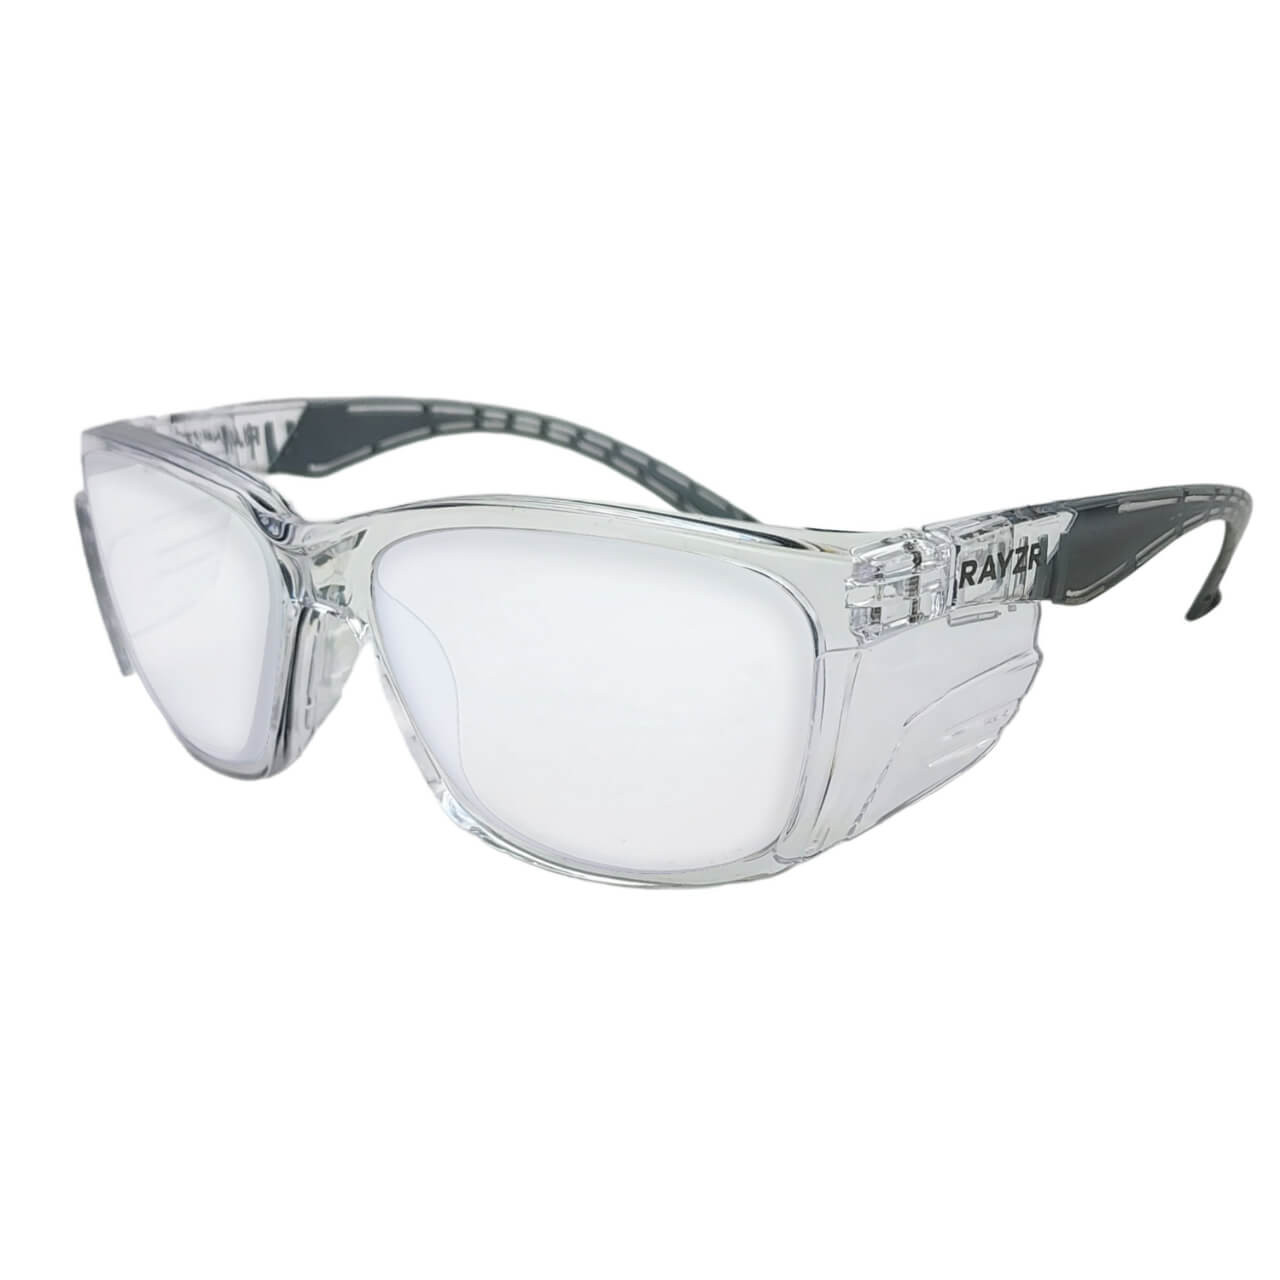 Rayzr Clear Frame Clear Lens Safety Glasses